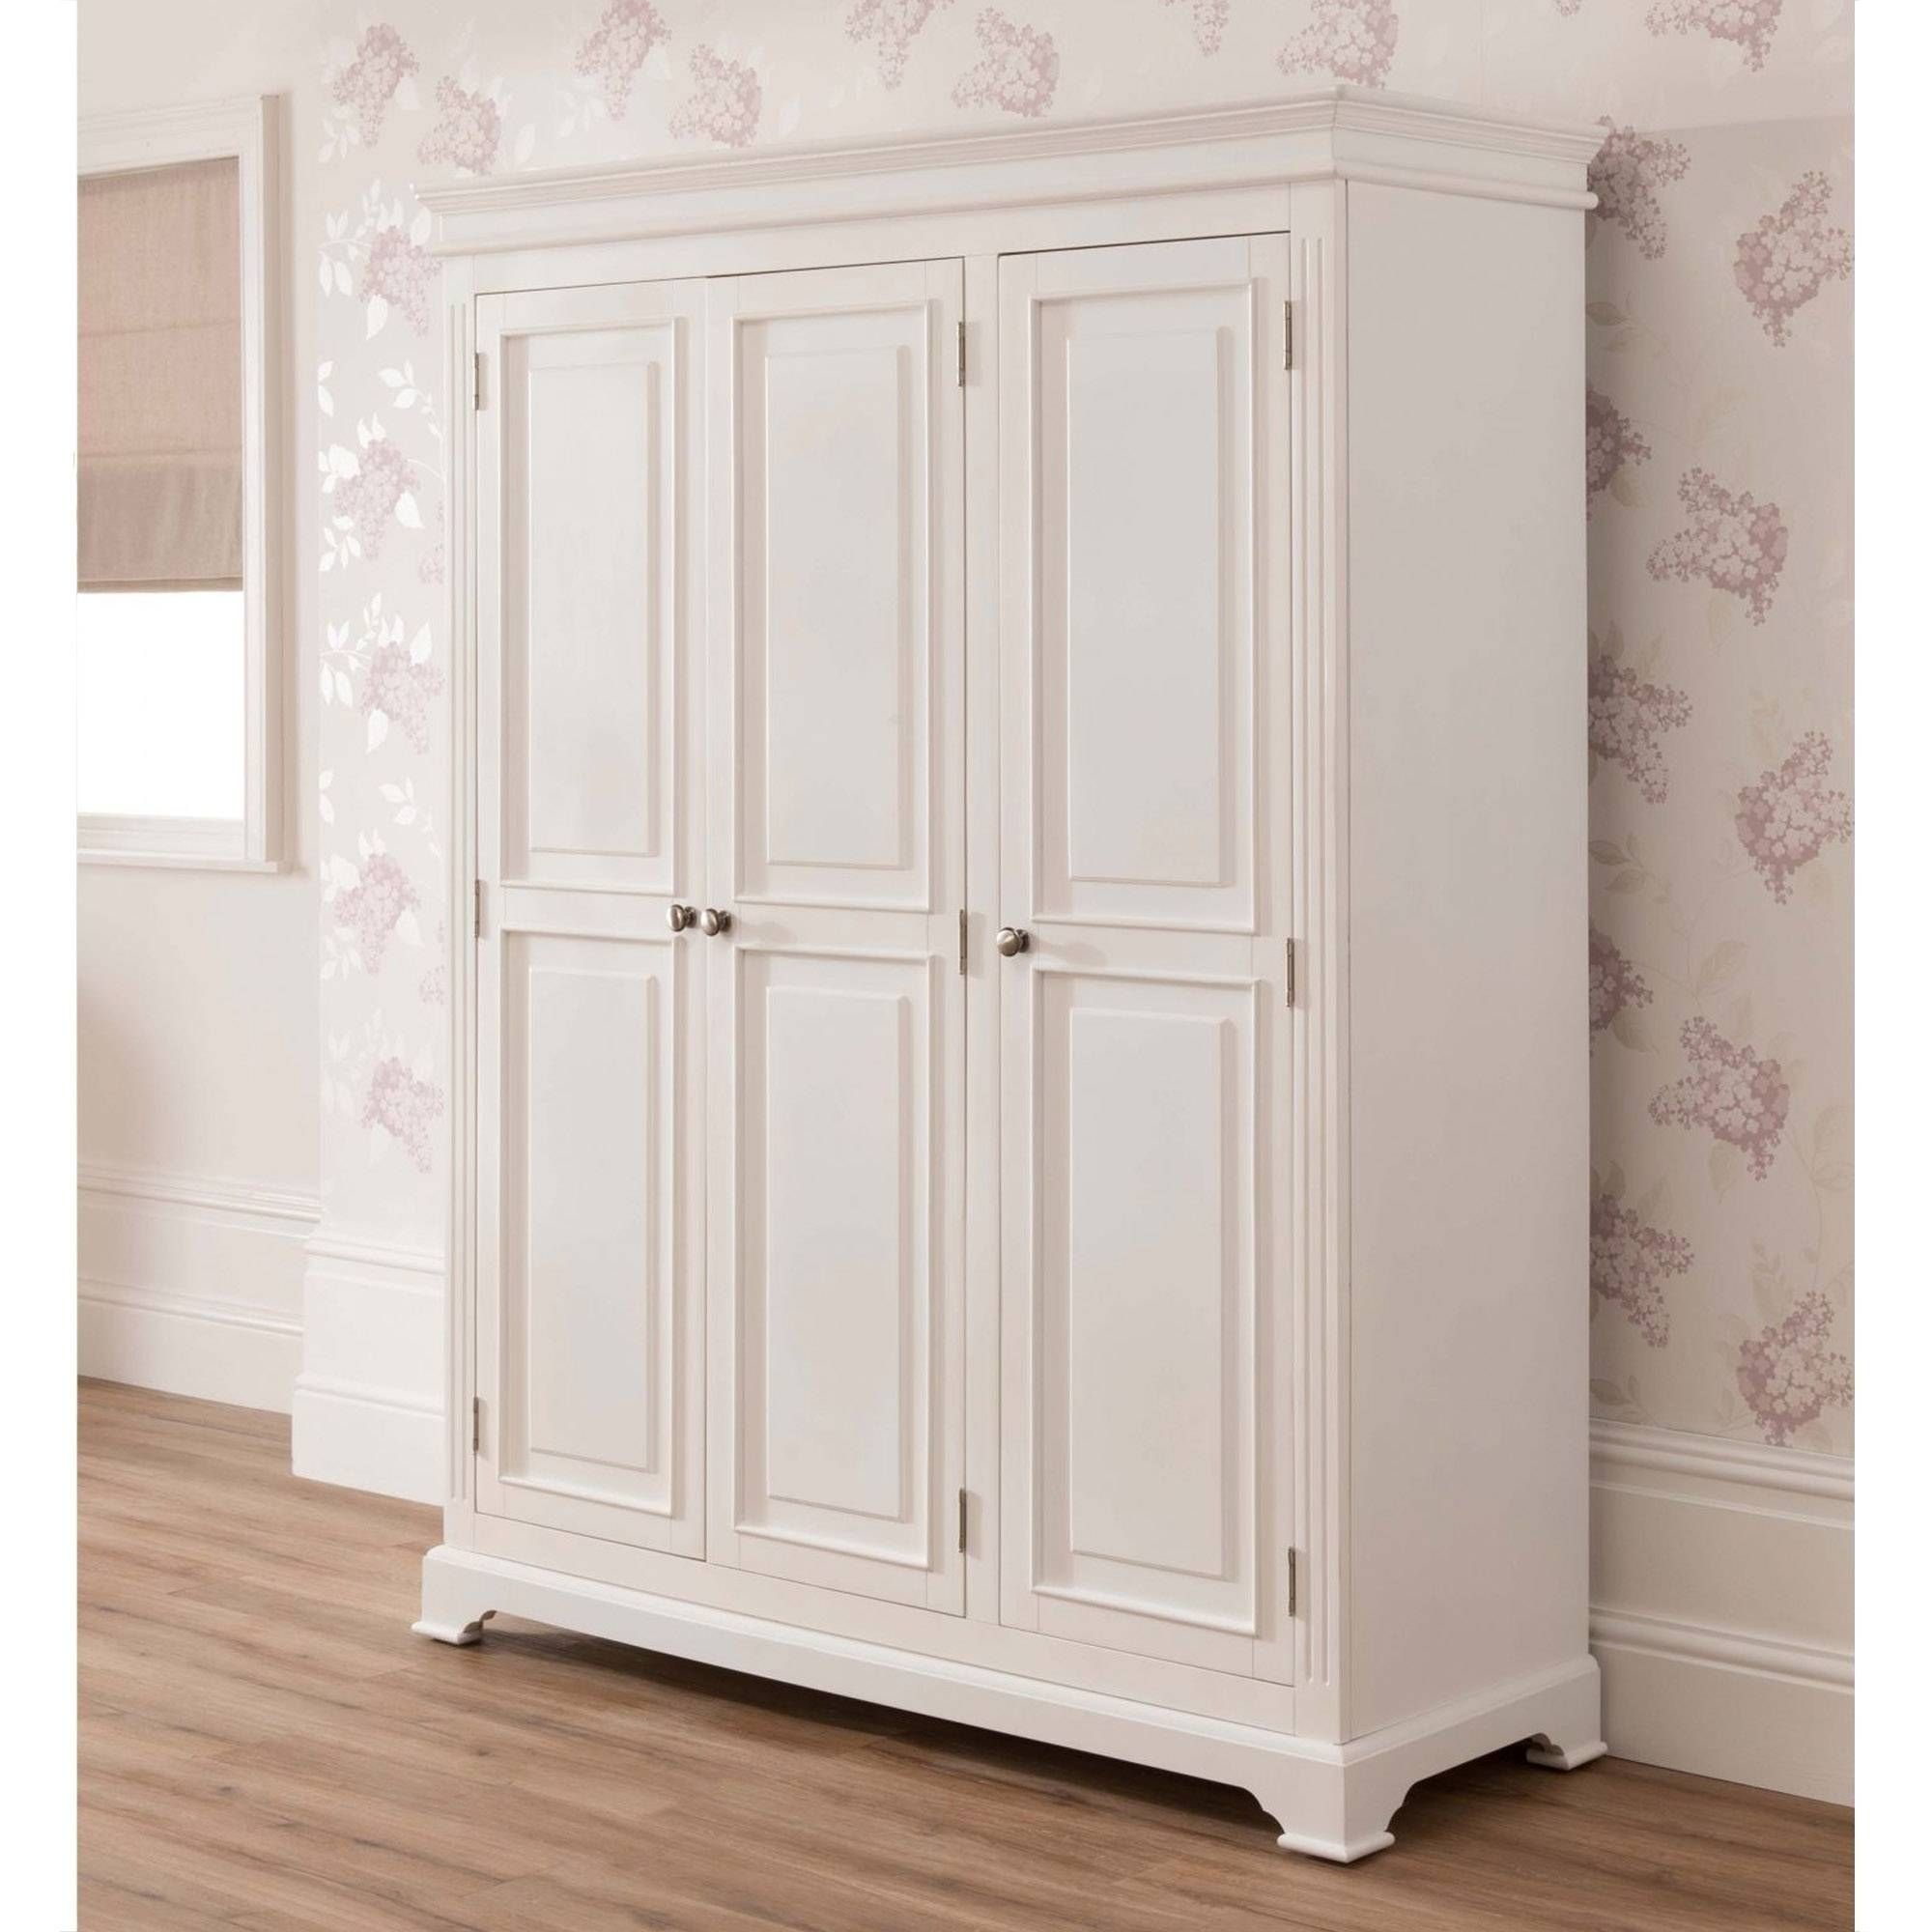 Sophia Shabby Chic Wardrobe Is A Fantastic Addition To Our Antique Regarding Chic Wardrobes (View 2 of 15)